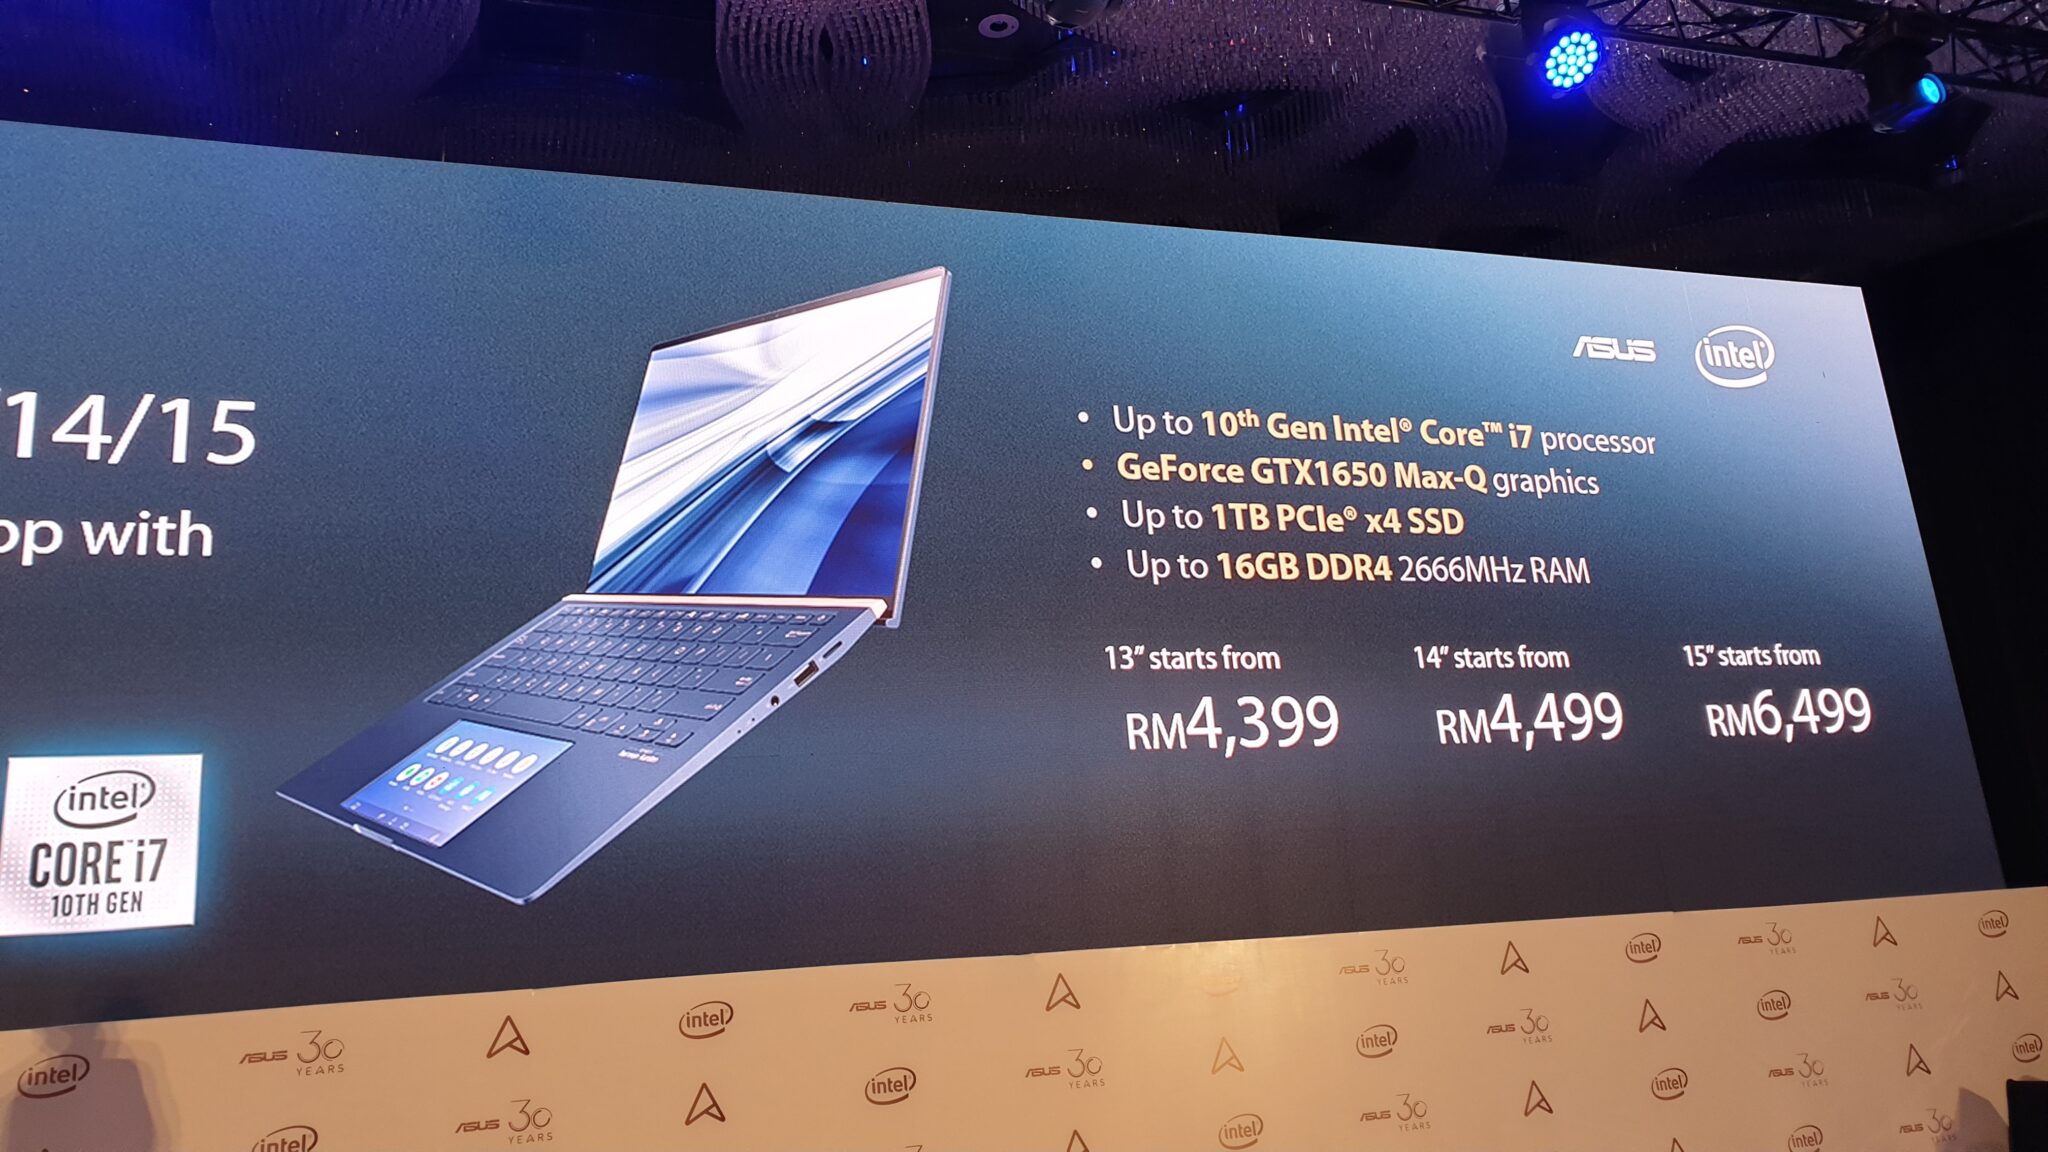 Asus 30th anniversary celebrations see launch of ZenBook Pro Duo, revamped ZenBooks with ScreenPad displays and more in Malaysia 2